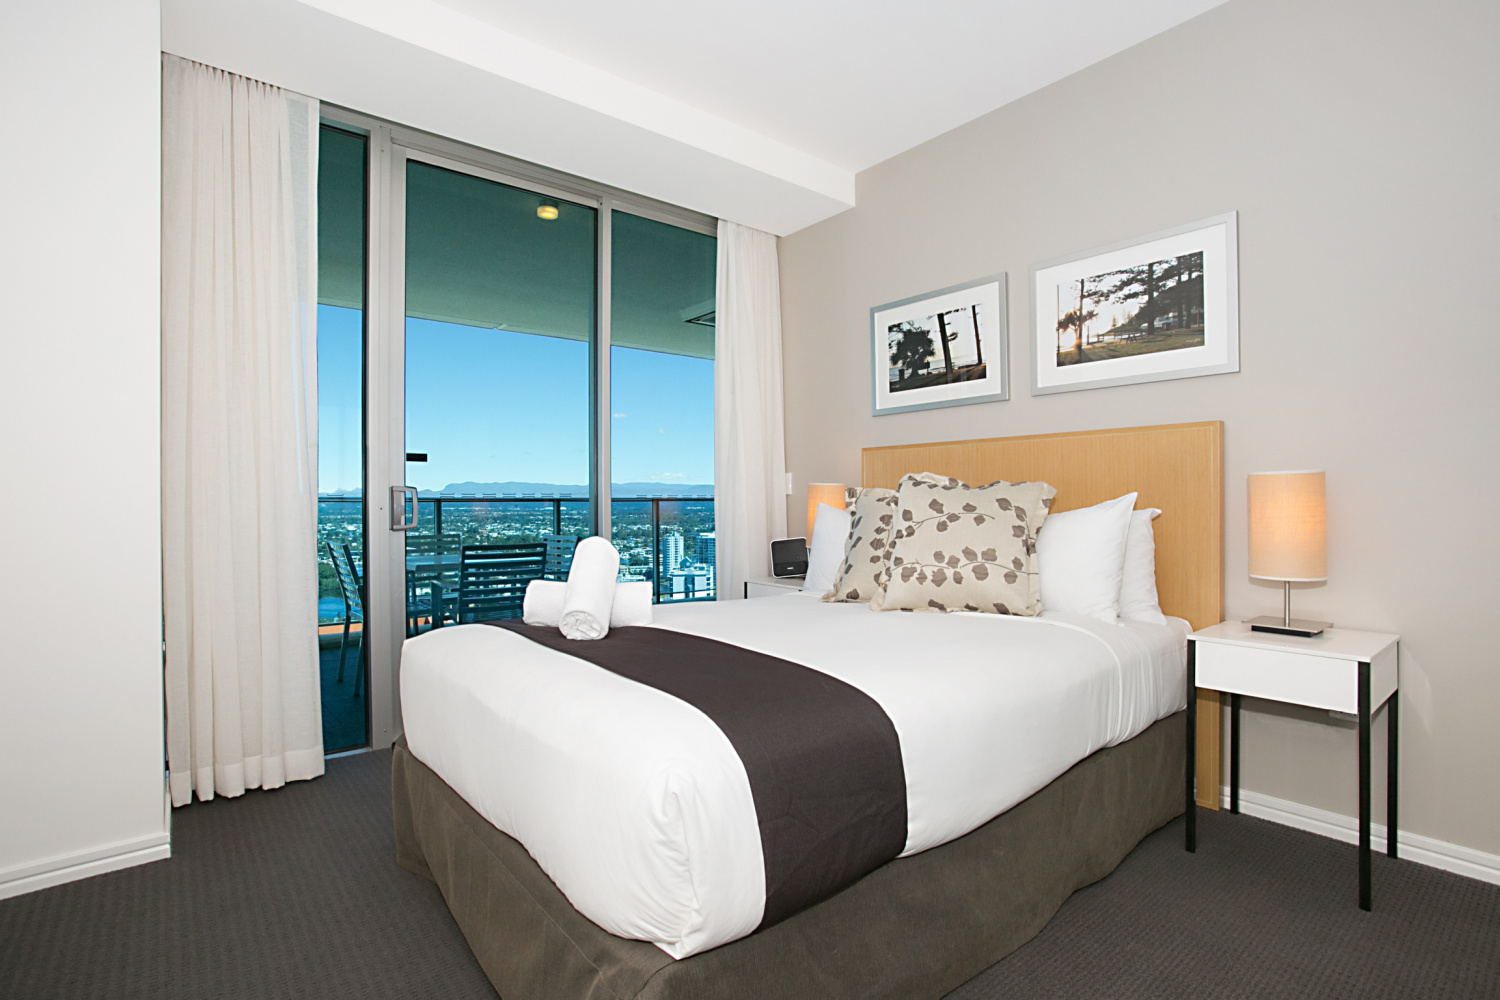 Master Bedroom with views of Nerang River